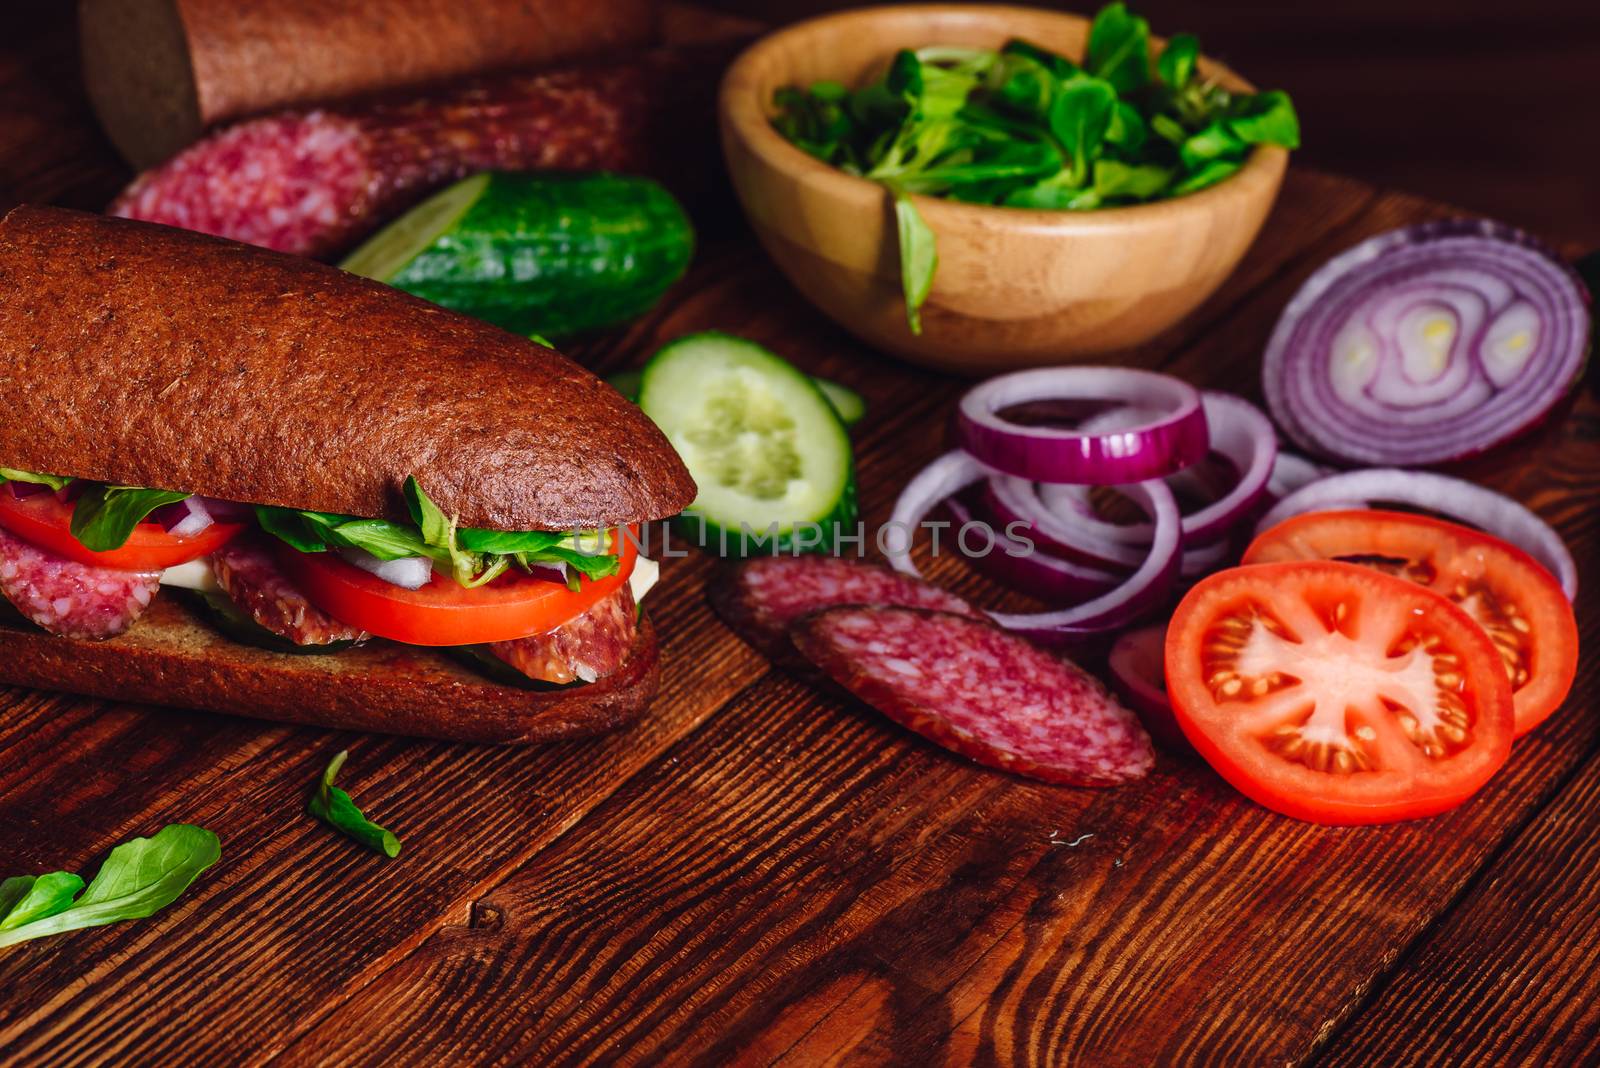 Sandwich with Salami and Vegetables by Seva_blsv